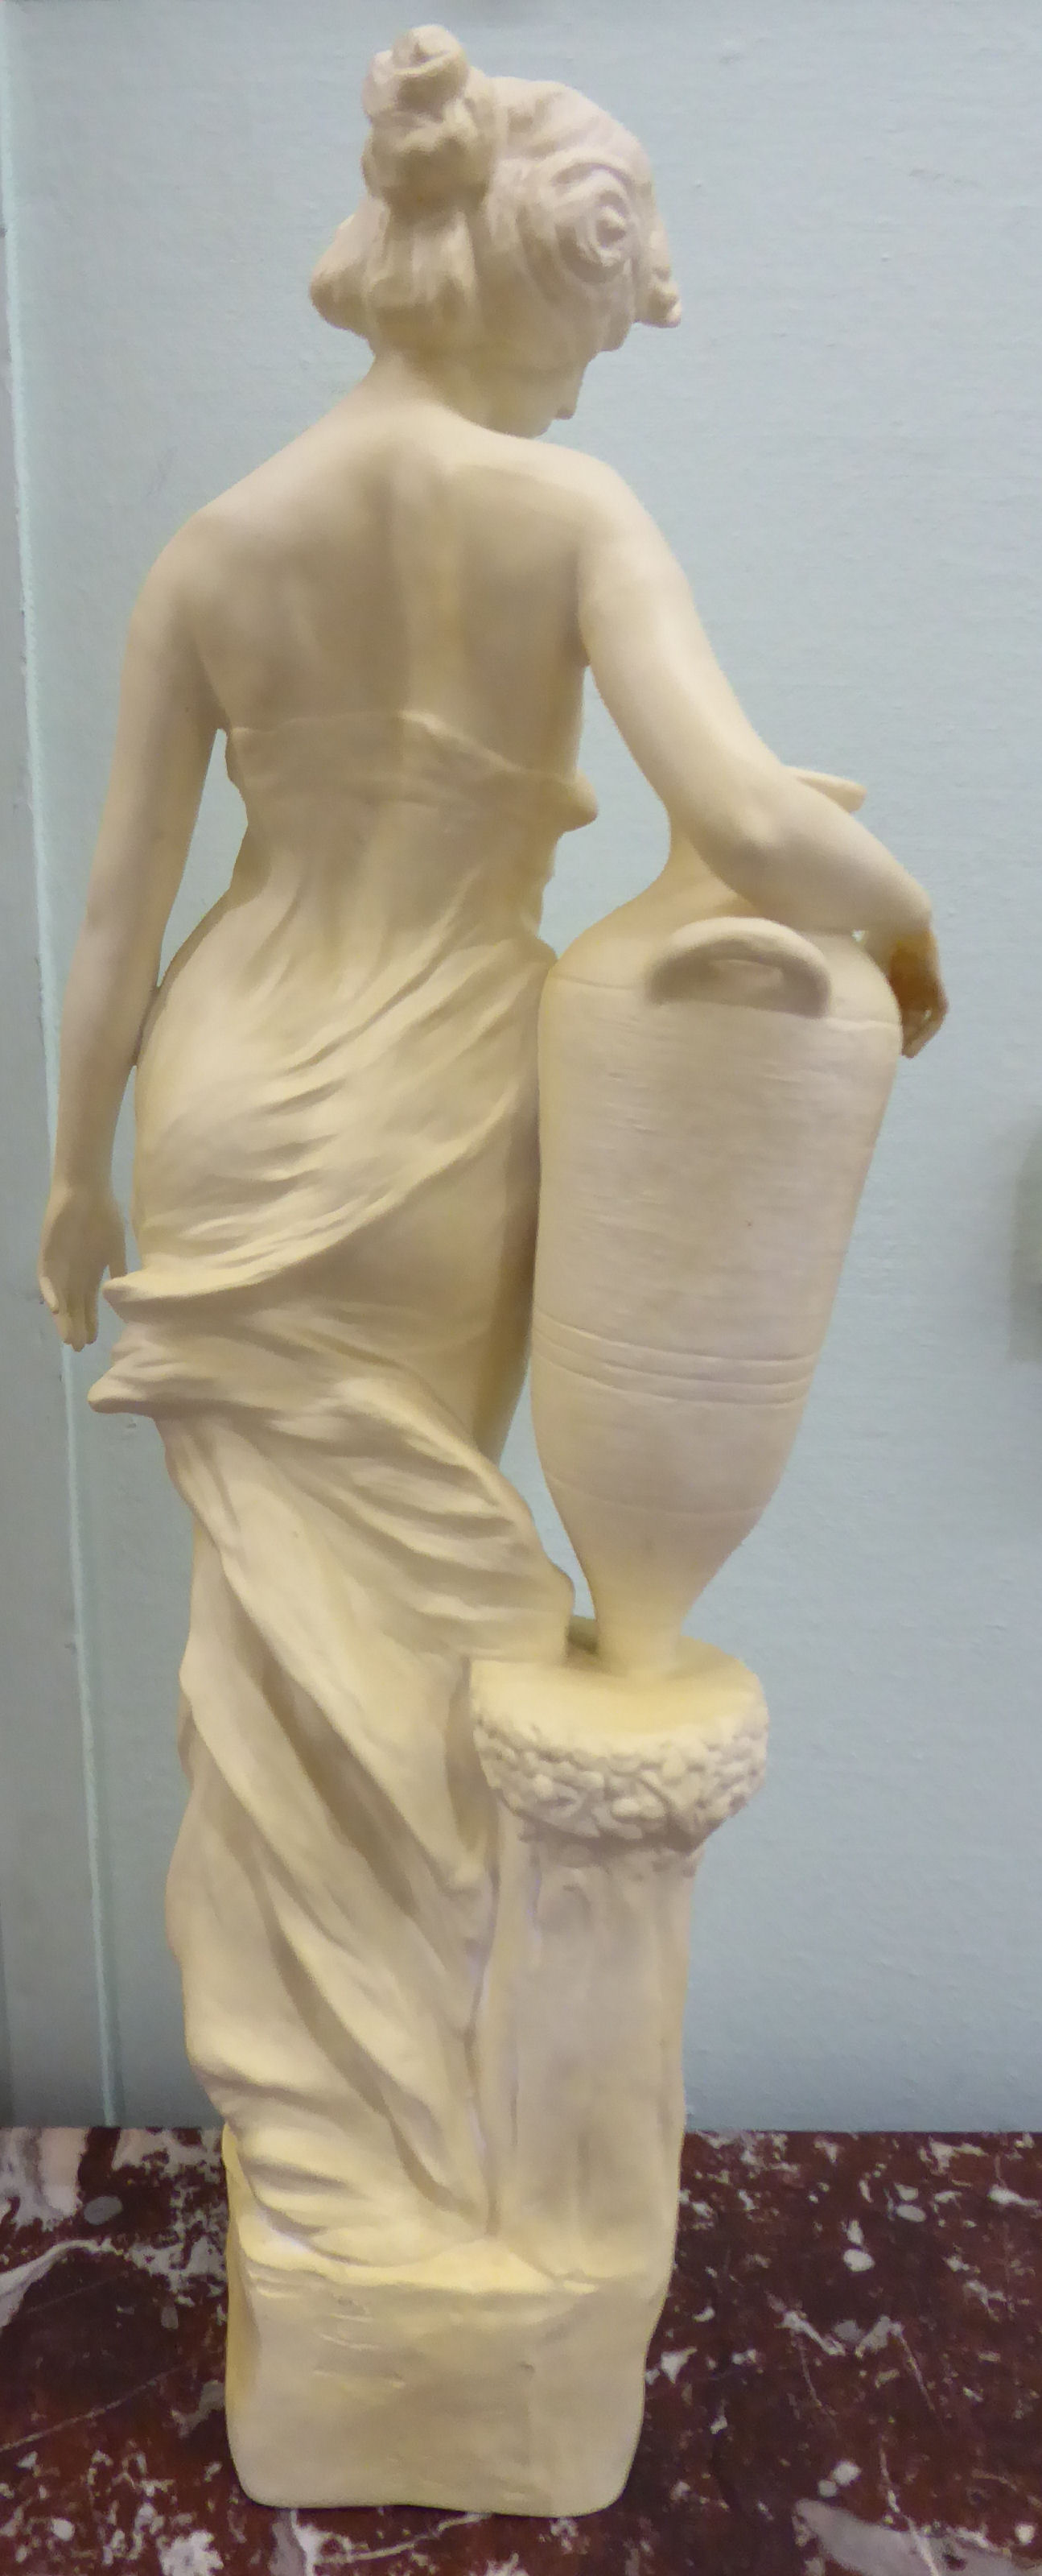 An unglazed standing plaster figure 'Aphrodite' holding a water vessel, - Image 8 of 16